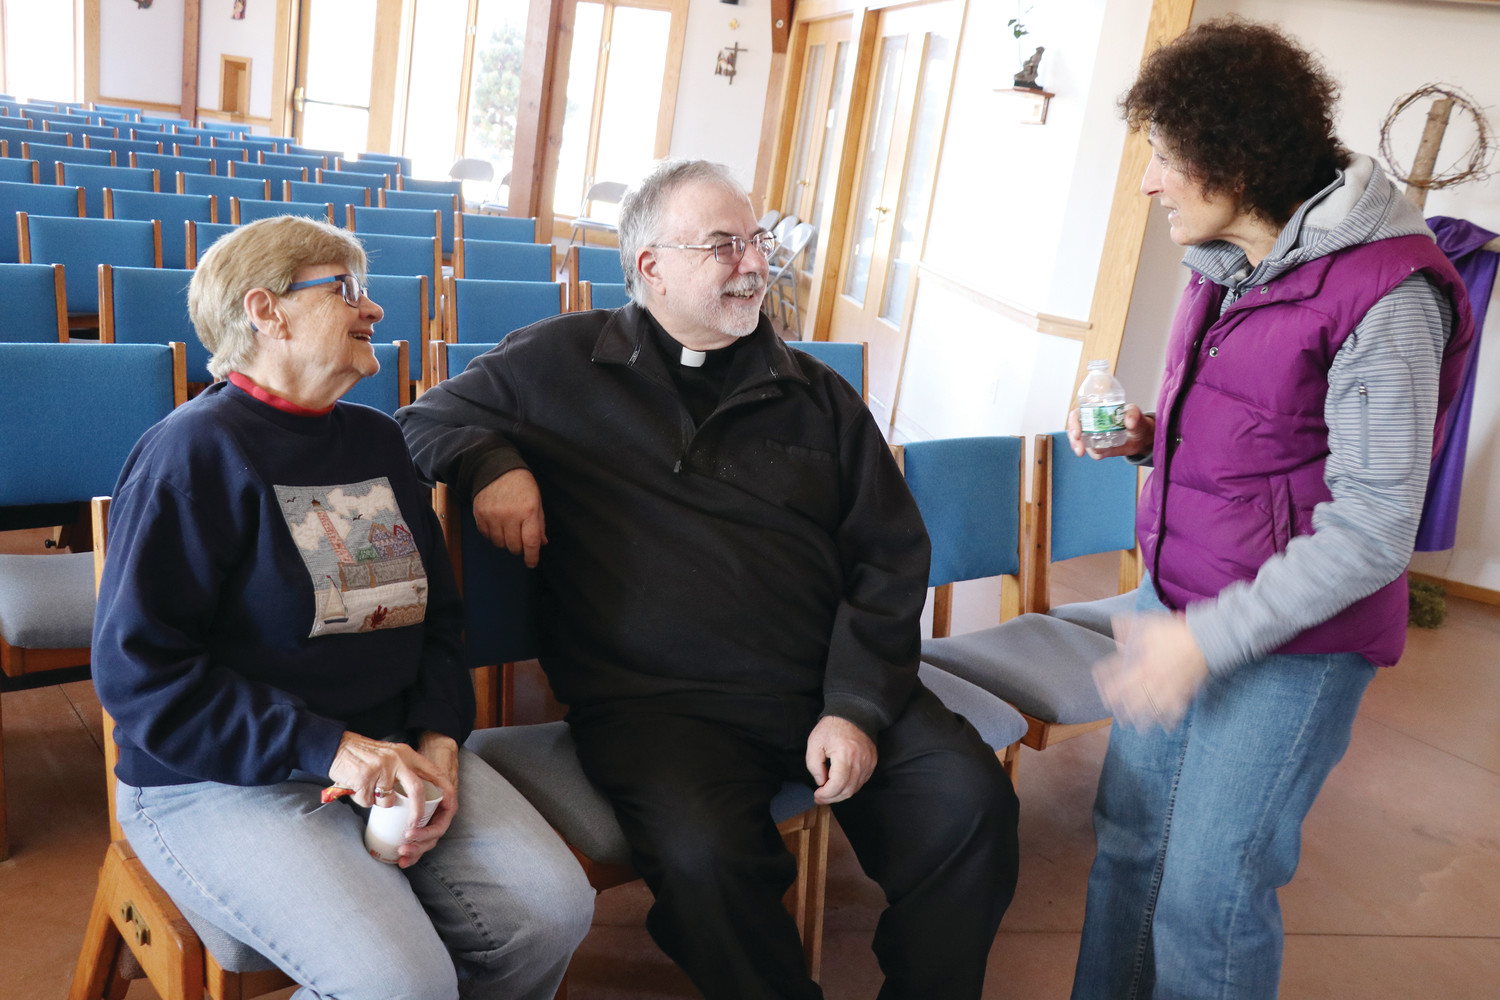 Father Paul Desmarais speaks with parishioners Carolyn Craig and Gloria Sloan about the benefits of the new parish center.